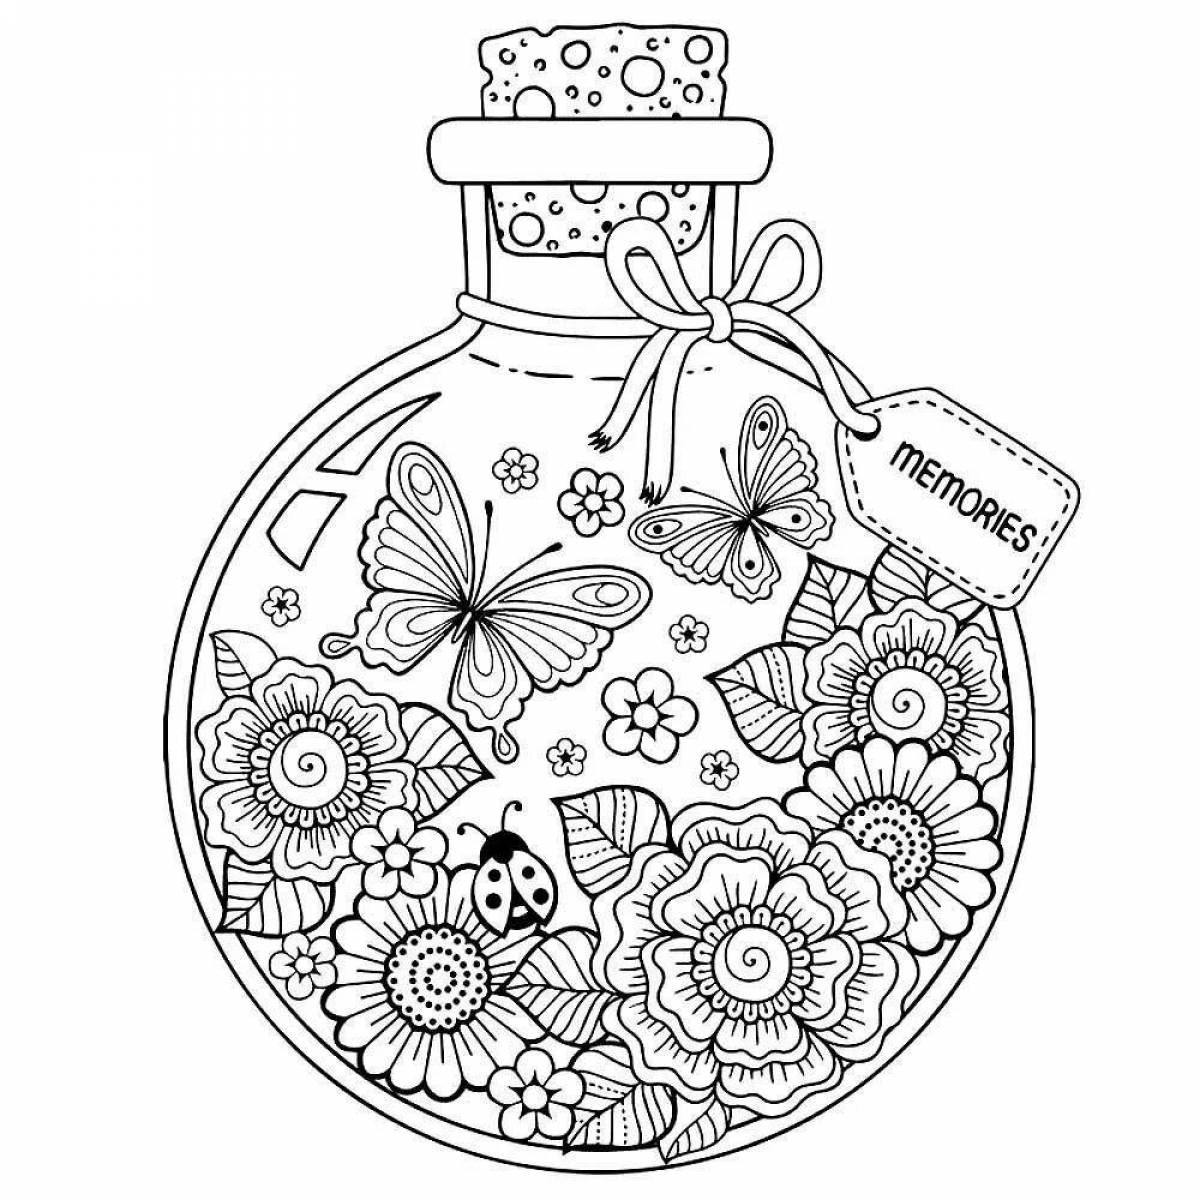 Color-lively hobbyline coloring page